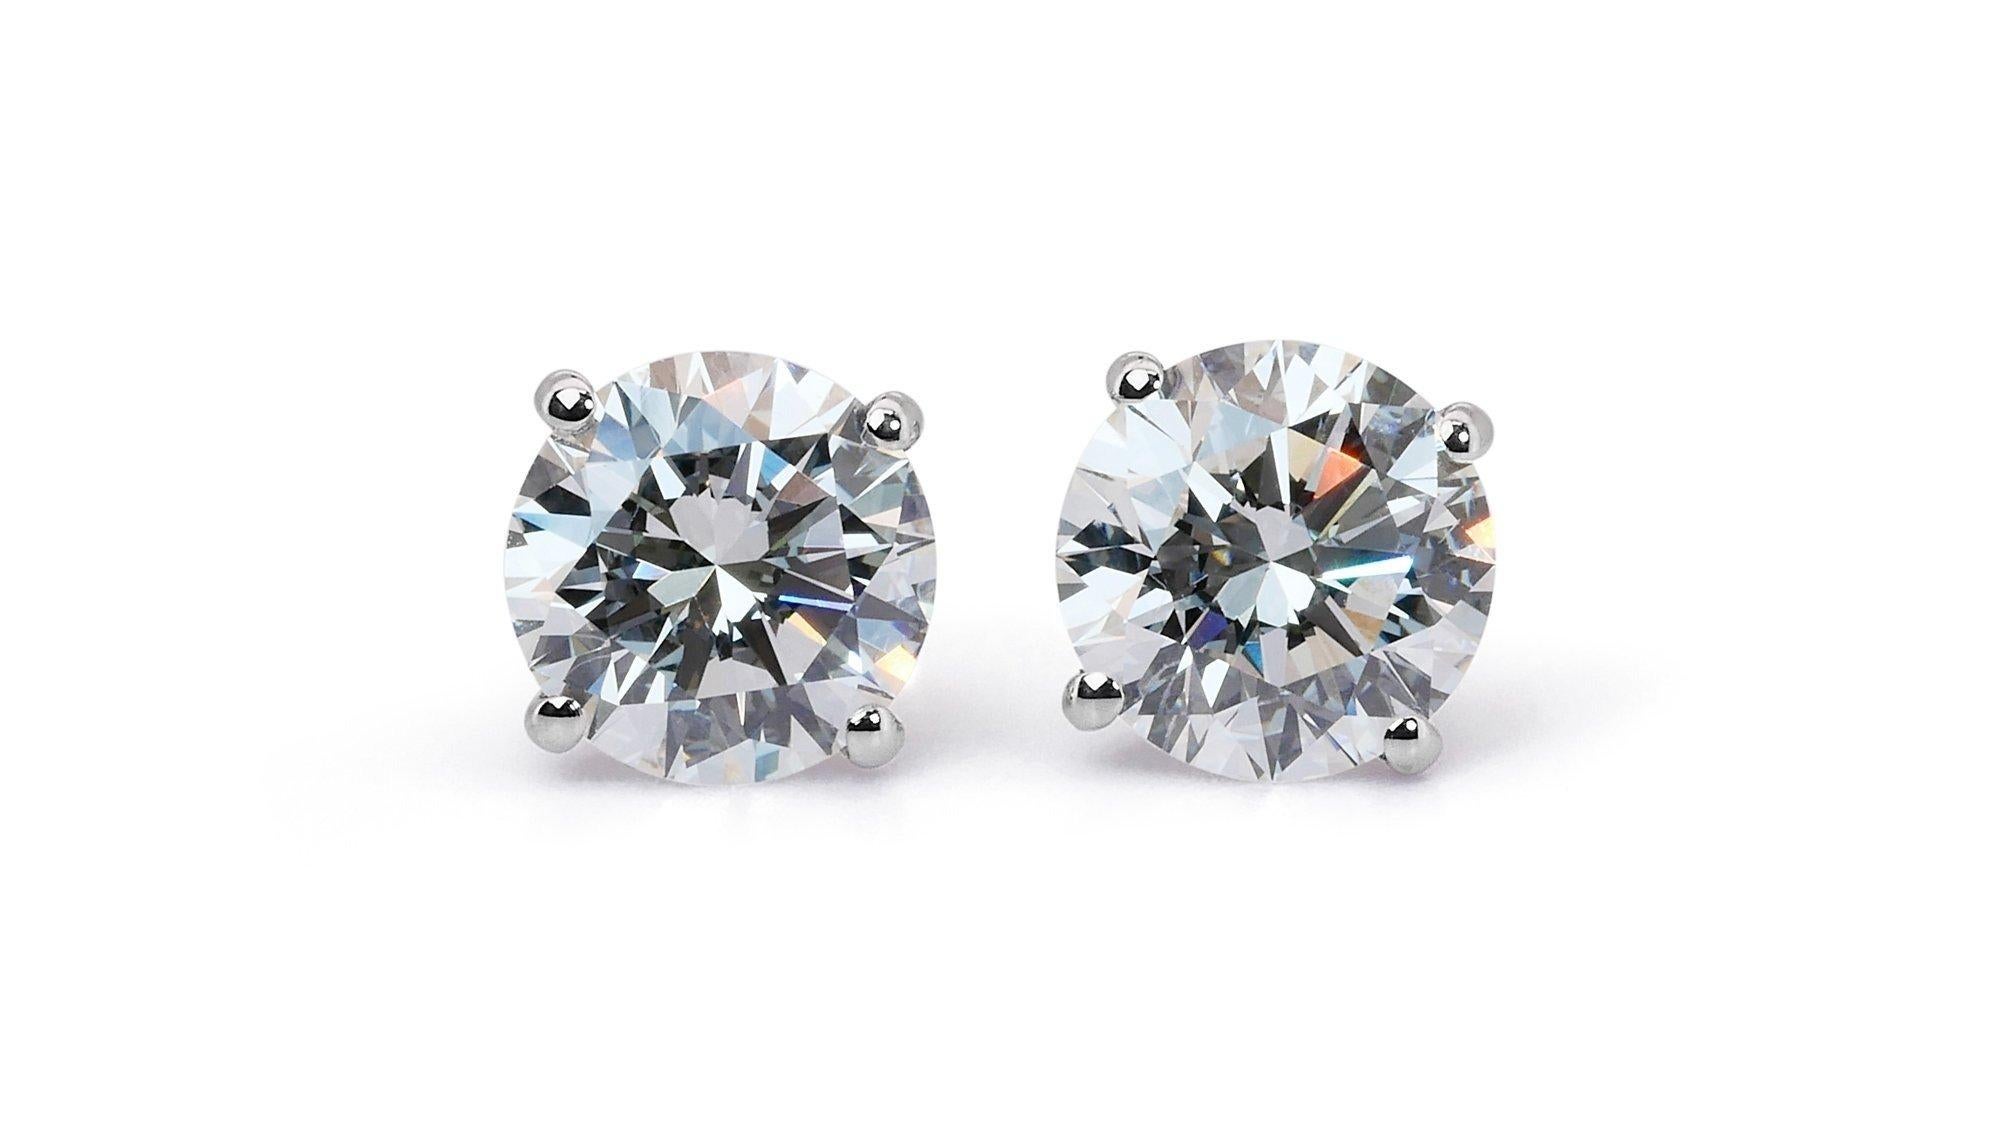 Glamorous 18k White Gold Stud Earrings w/ 2.03 Carat Natural Diamonds GIA Cert In New Condition For Sale In רמת גן, IL